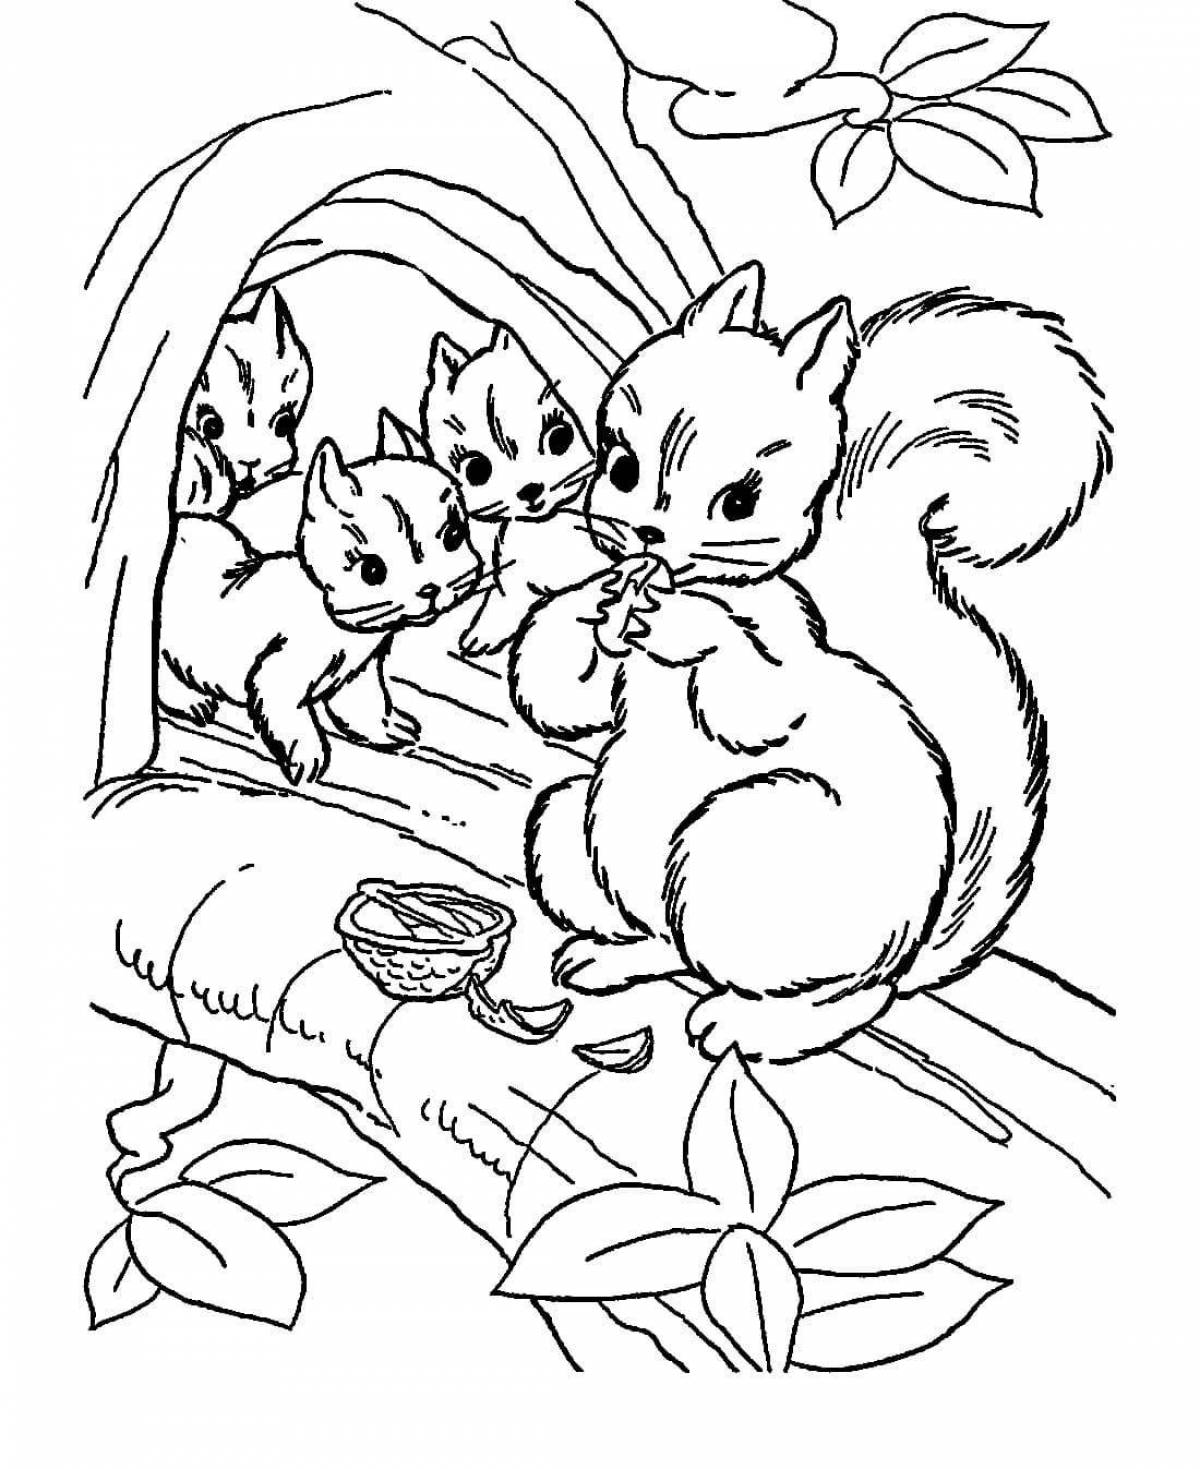 Outstanding wild animal coloring page for 6-7 year olds